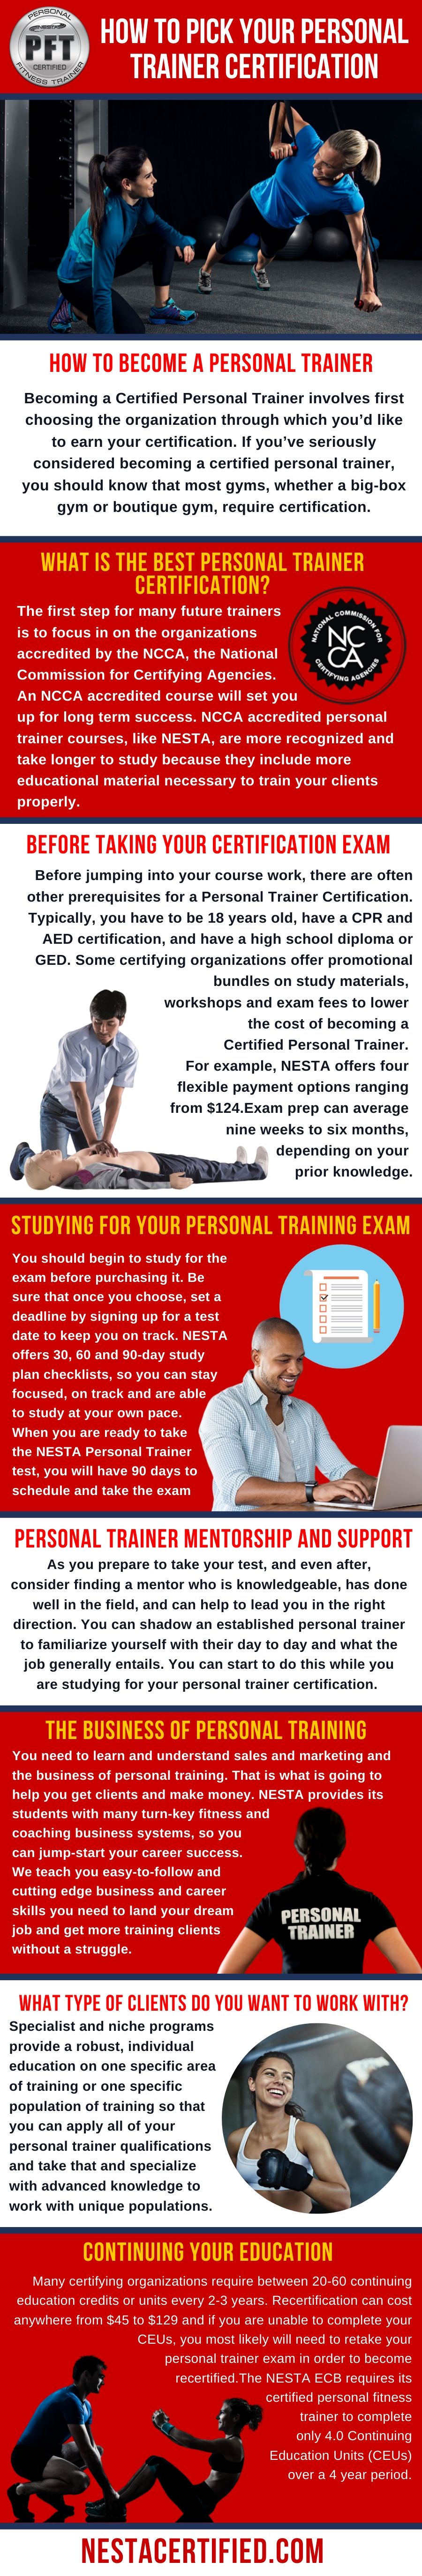 How to Pick Your Personal Trainer Certification.jpg